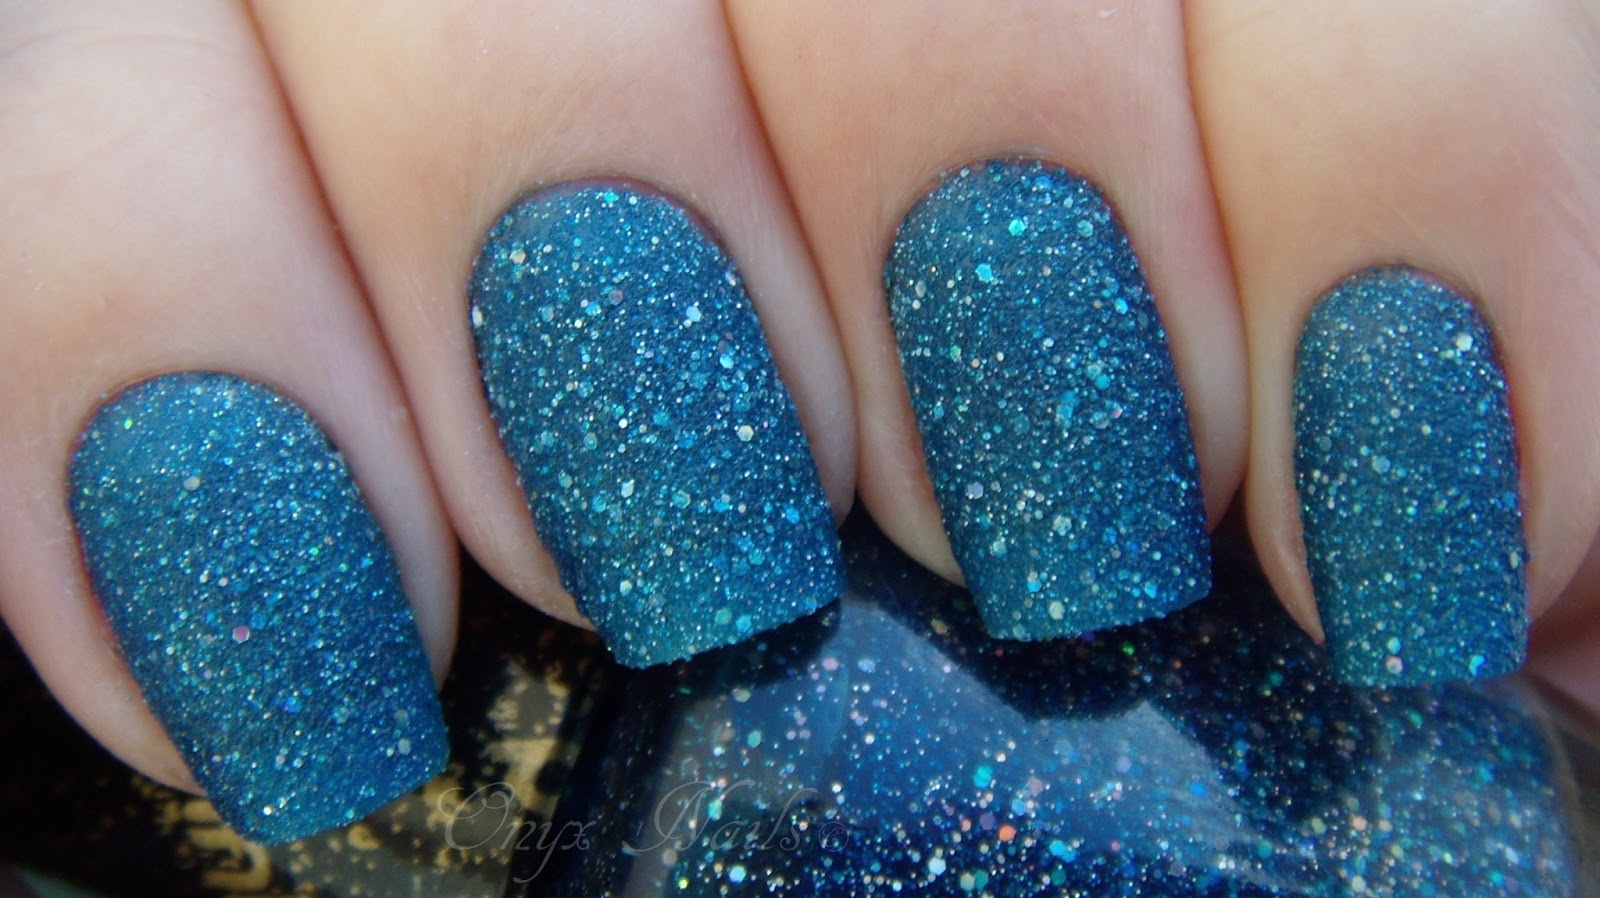 Onyx Nails: OPI Get Your Number Swatch and Review